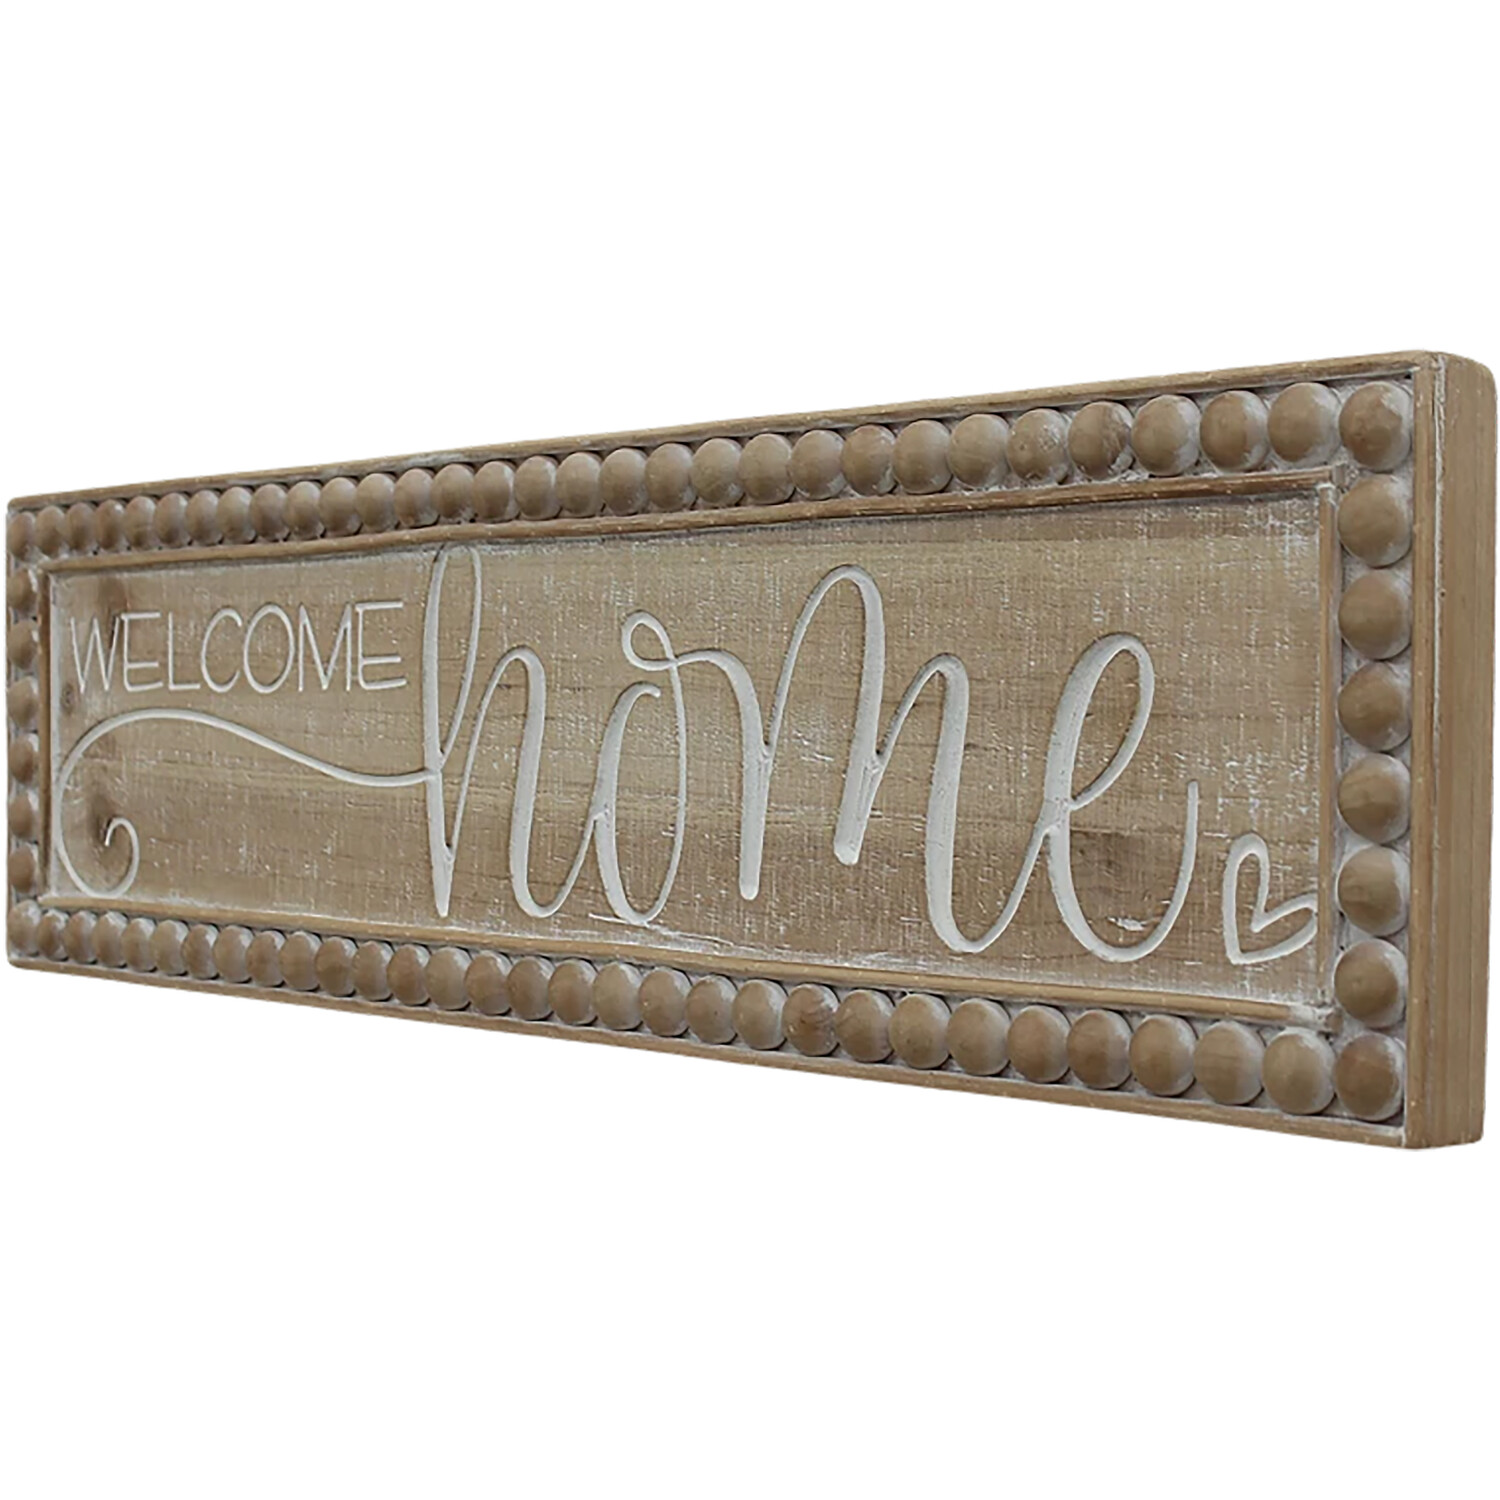 Welcome Home Beaded Wooden Plaque - Brown Image 3